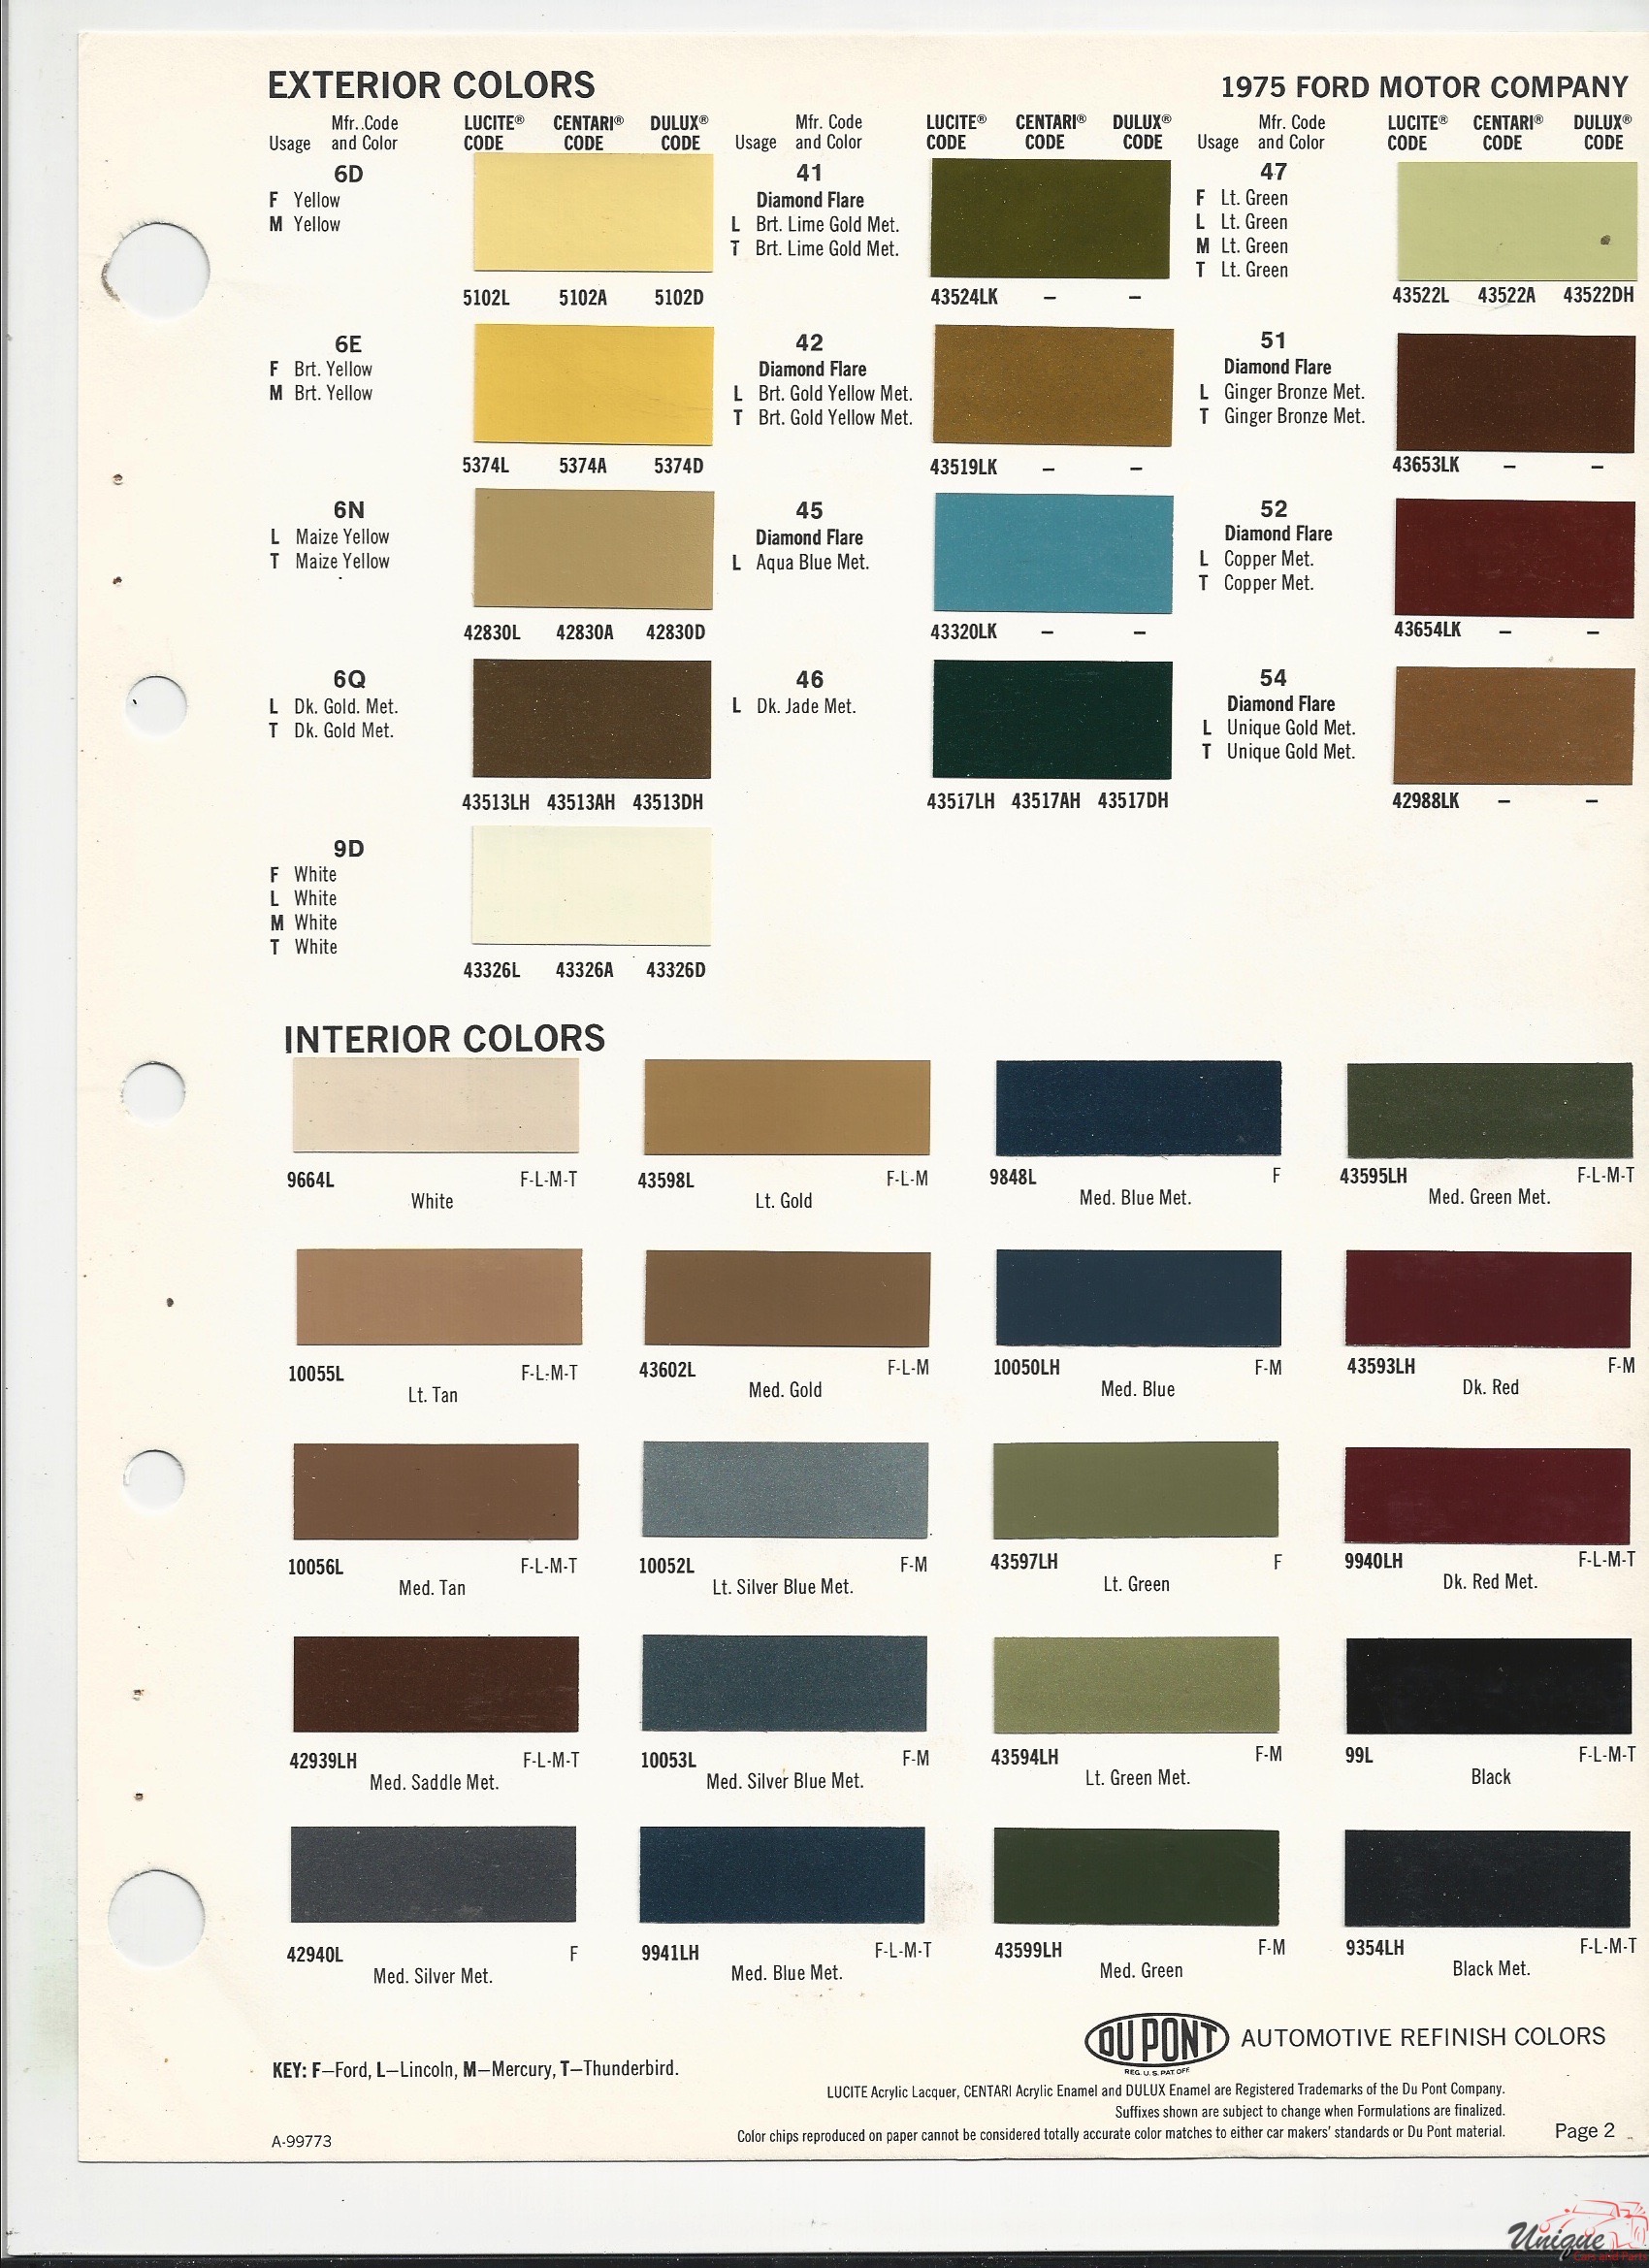 1975 Ford-1 Paint Charts